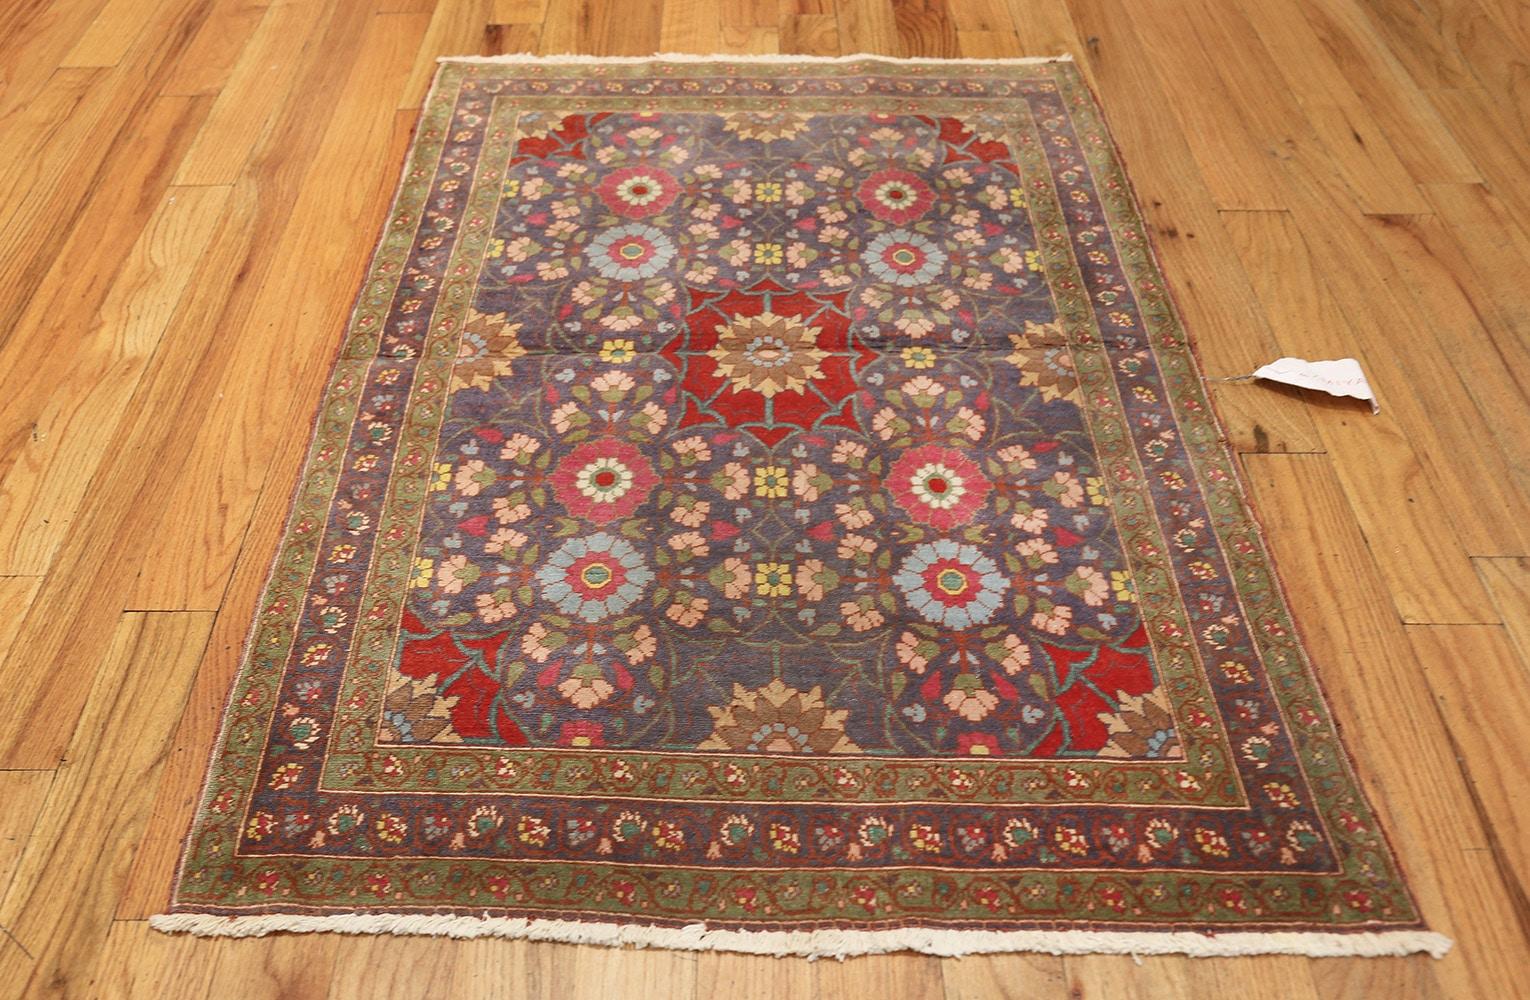 Fine Antique Persian Tabriz Rug. Size: 2 ft 10 in x 4 ft 2 in (0.86 m x 1.27 m) 2